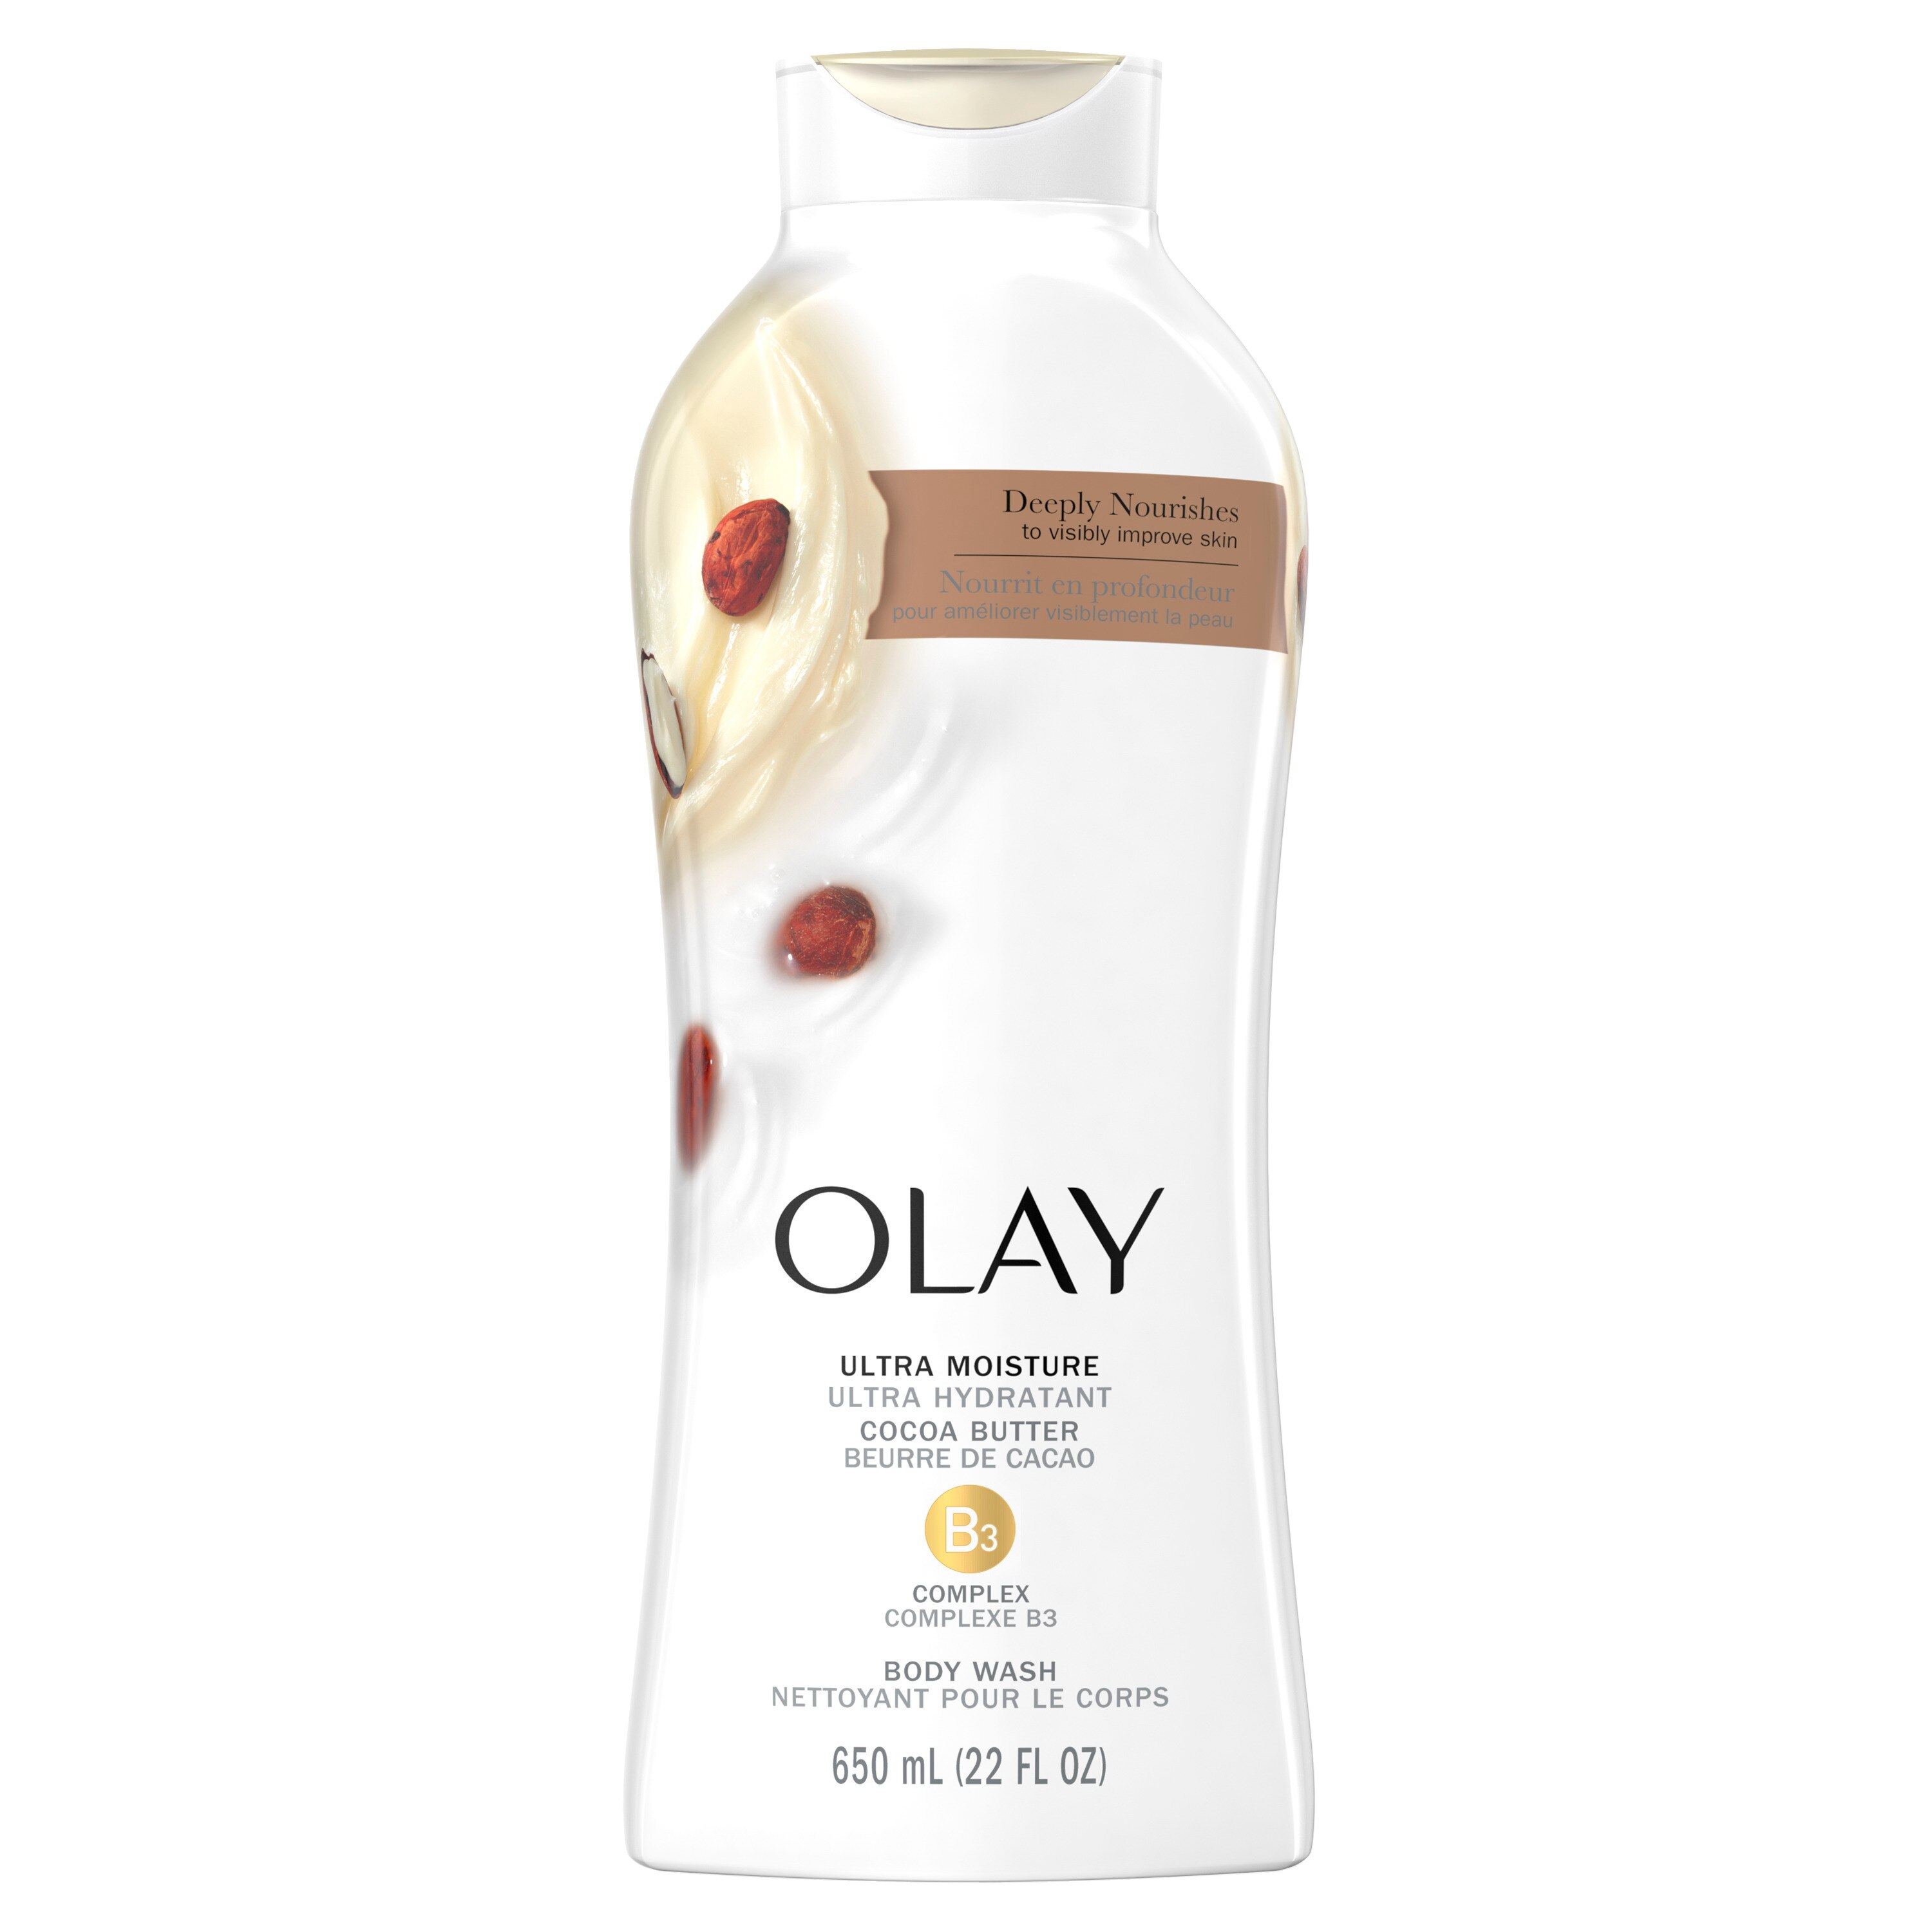 Olay Ultra Moisture with Cocoa Butter, 22 oz